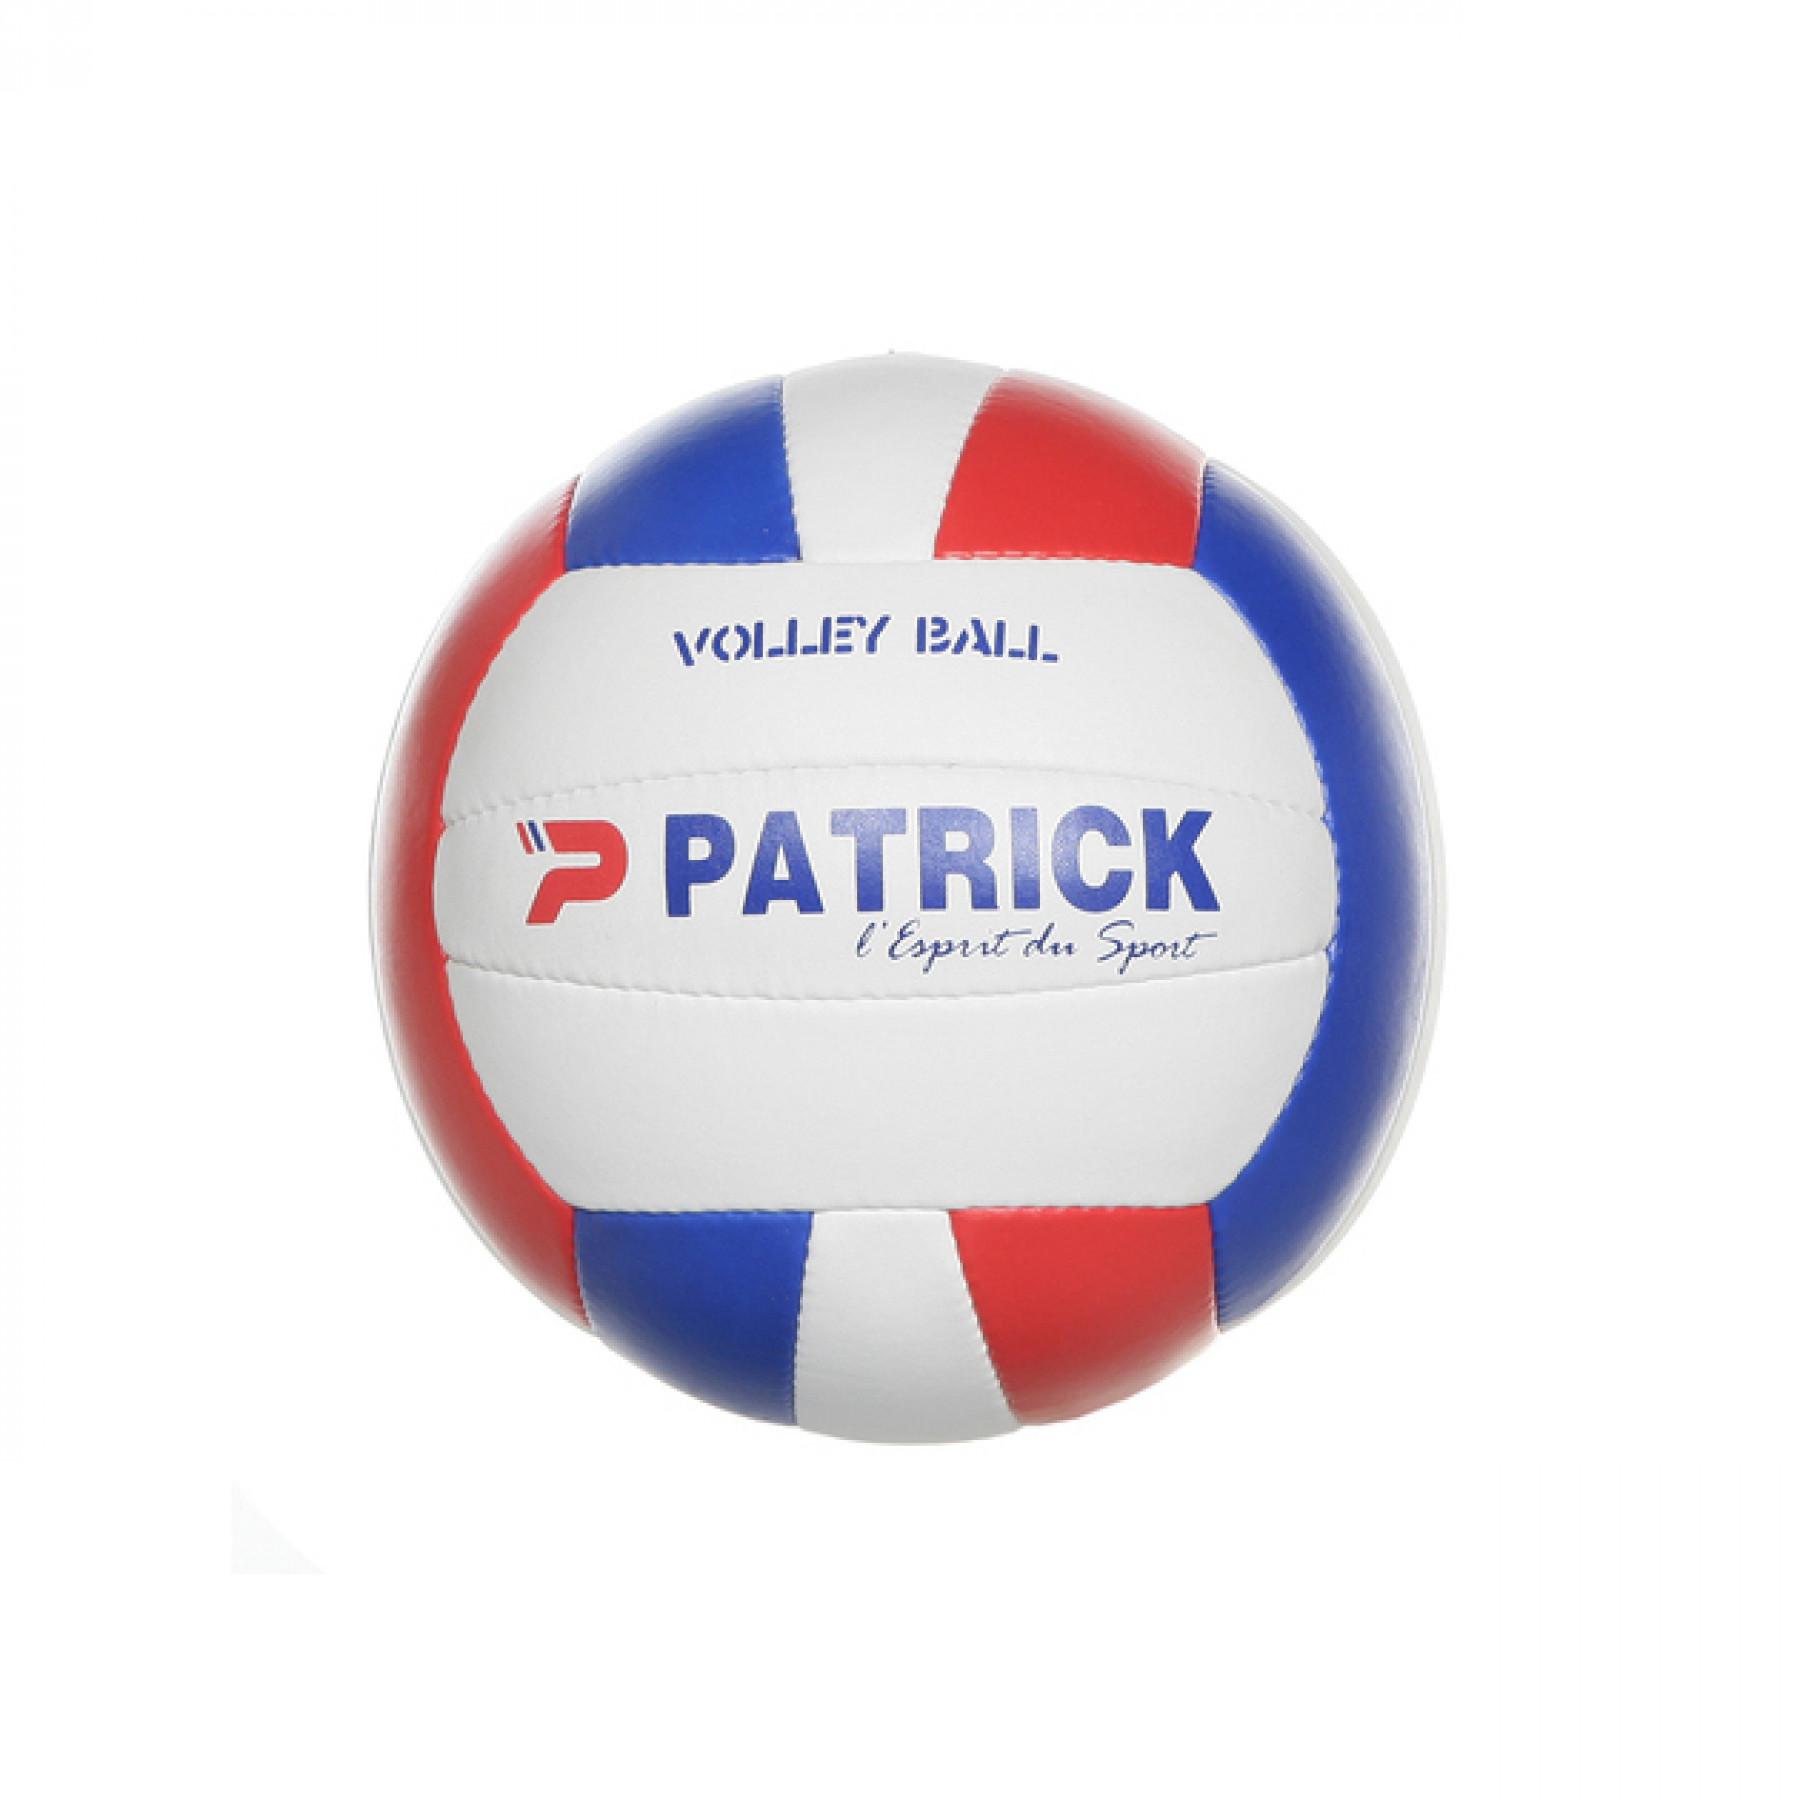  volley match ball Patrick volley